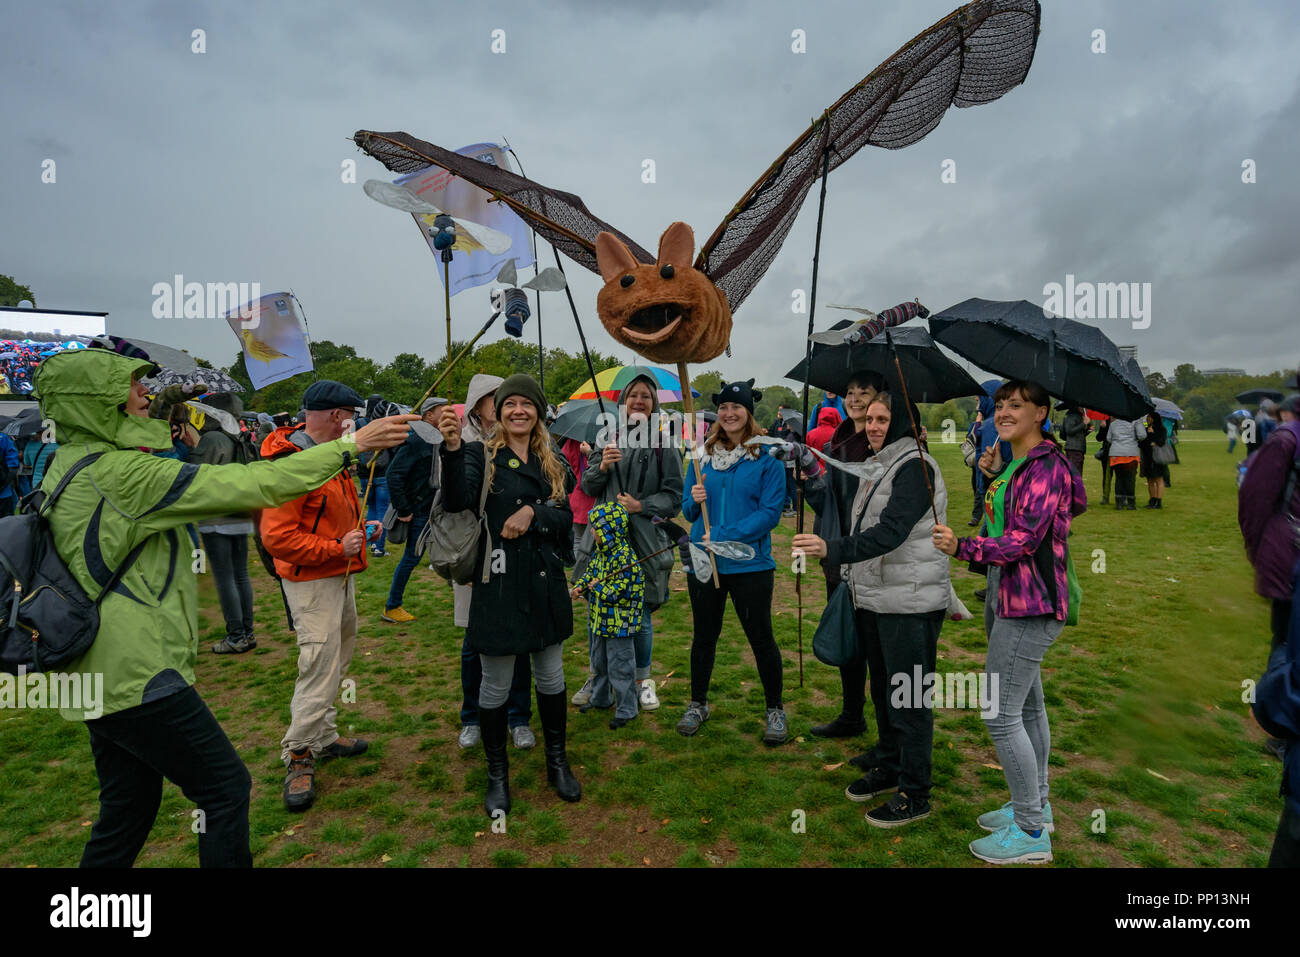 London, UK. 22 September 2018. Green Party members including Sian Berry and Caroline Lucas MP pose with the campaigners holding a giant bat and midges at the rally. Several thousands came to a rally in Hyde Park before the march through London on The Peoples Walk for Wildlife set up by naturalist and broadcaster Chris Packham to support the People's Manifesto for Wildlife drawn up by him with the aid of 17 independent experts and scientists aimed at halting the drastic decline in British wildlife. The even was supported by many NGOs, schools and environmental activists. Credit: ZUMA Press, Inc Stock Photo